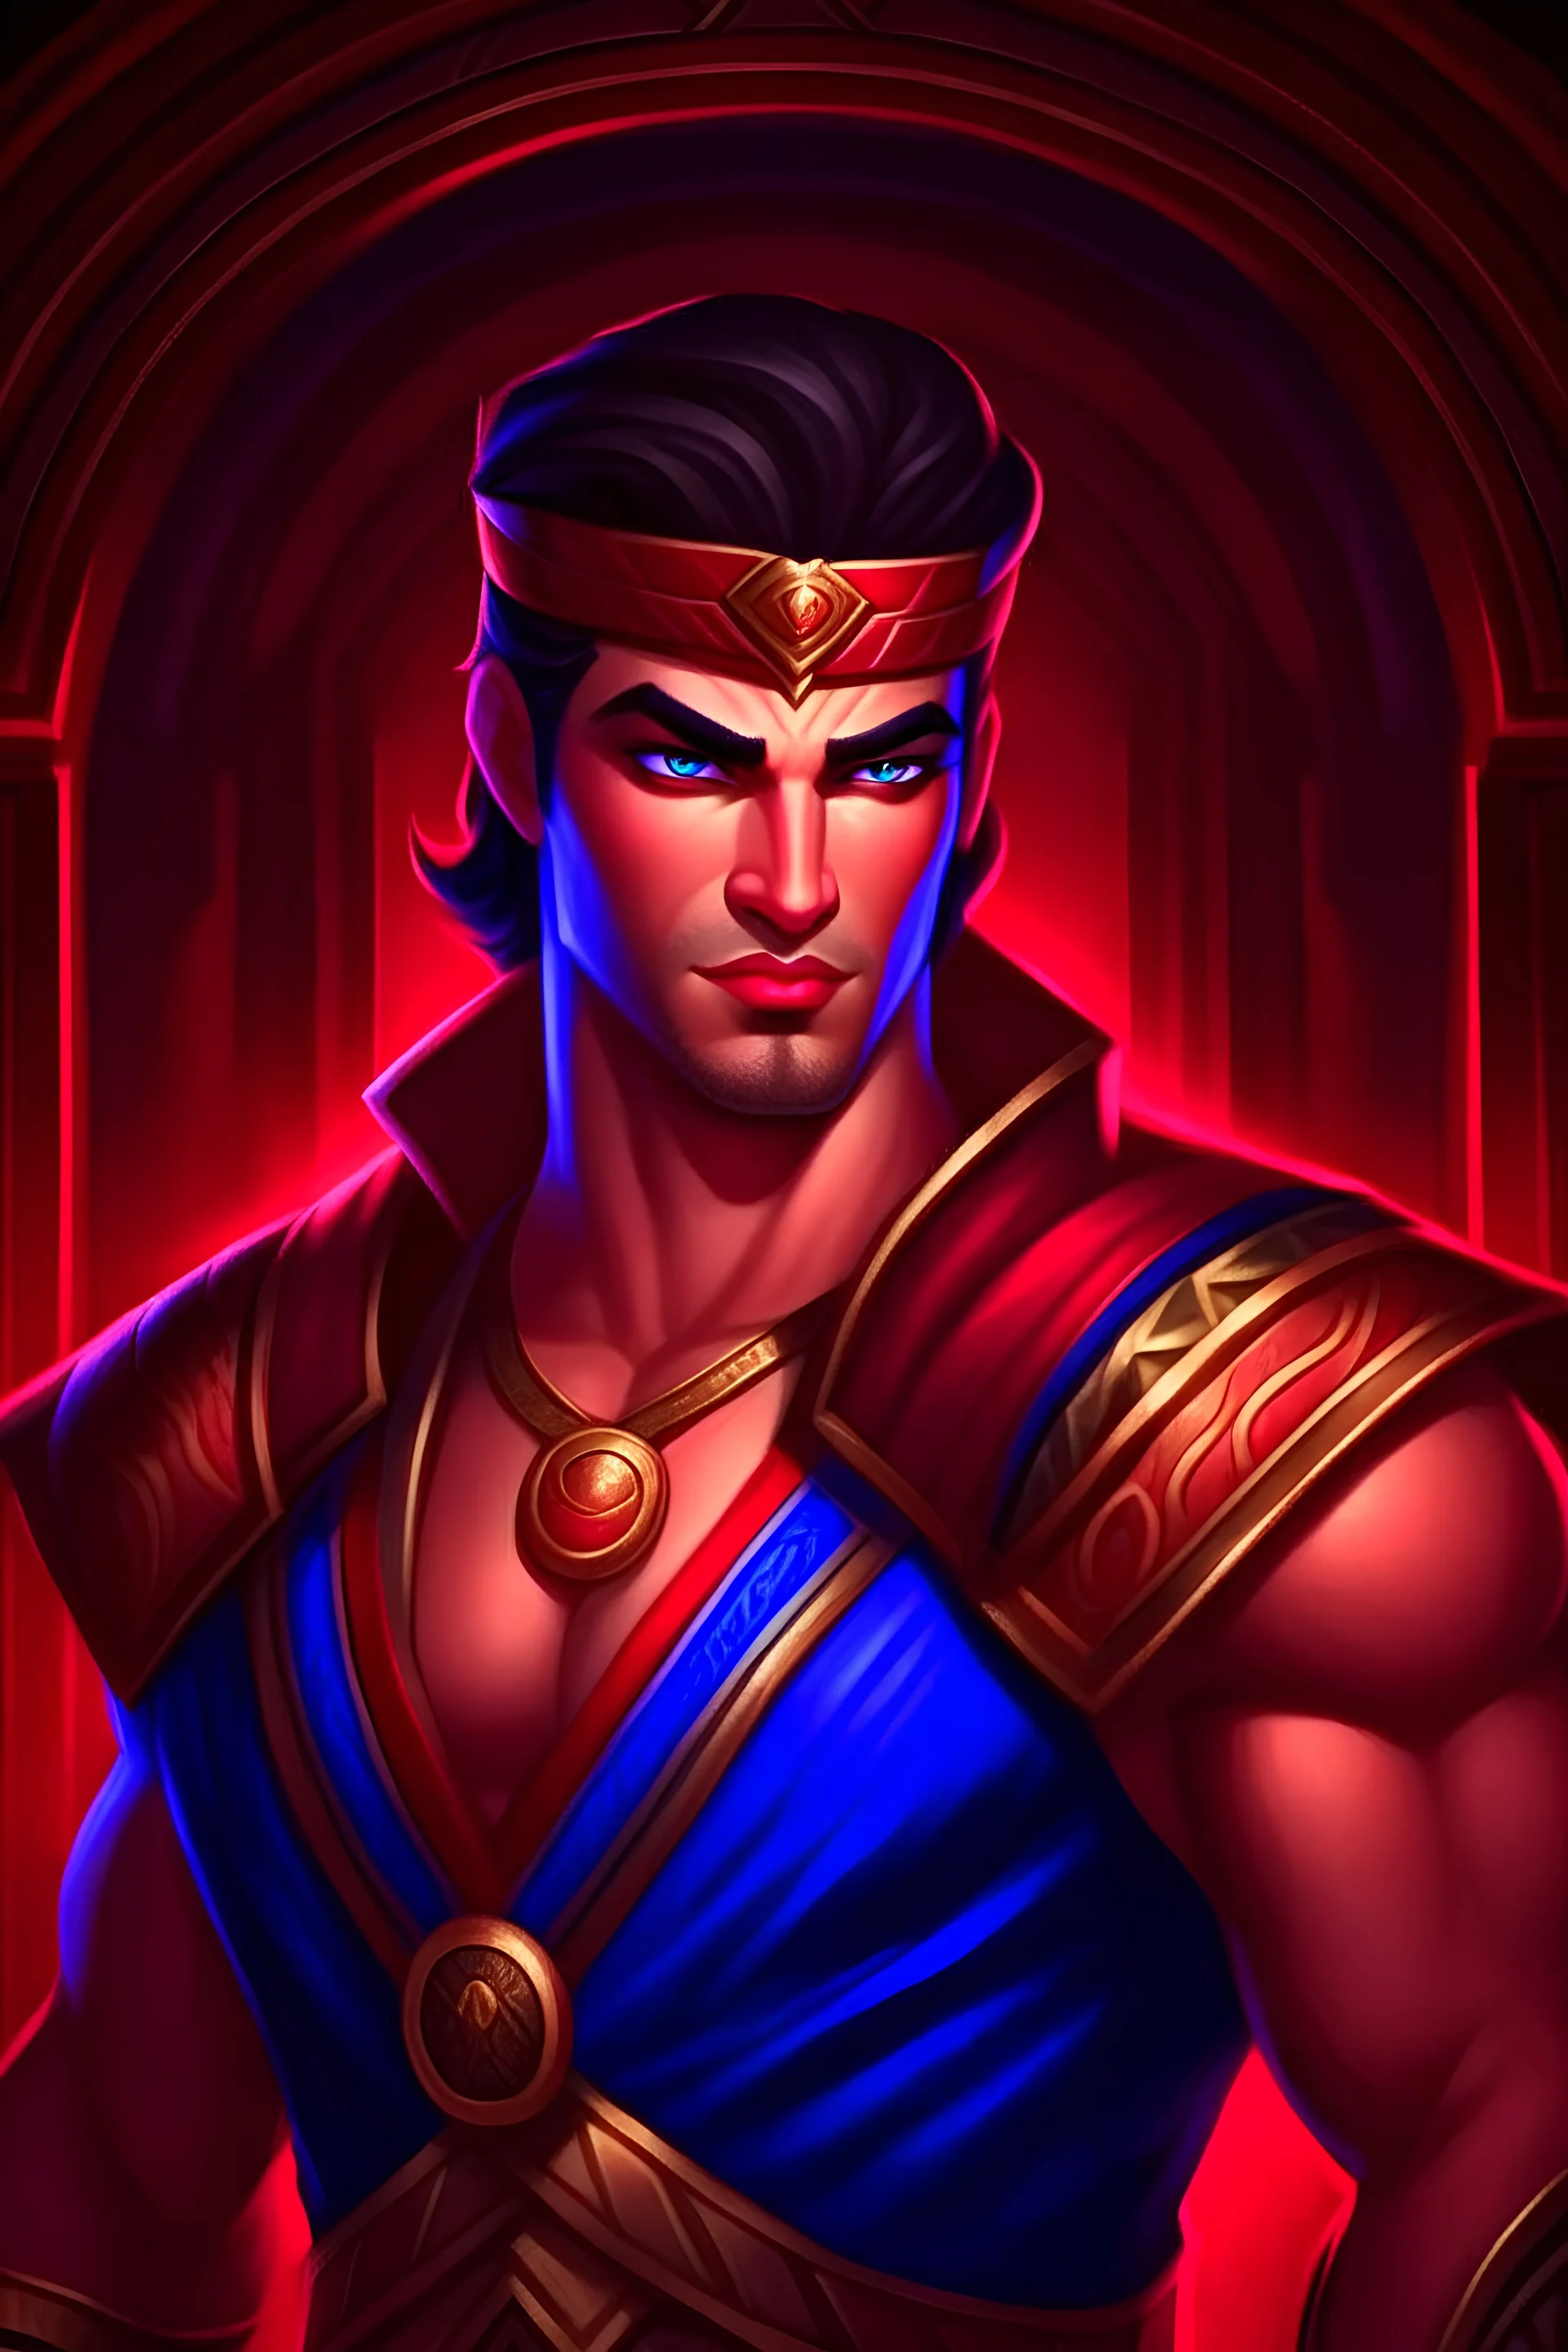 Pharaonic vampire handsome background only